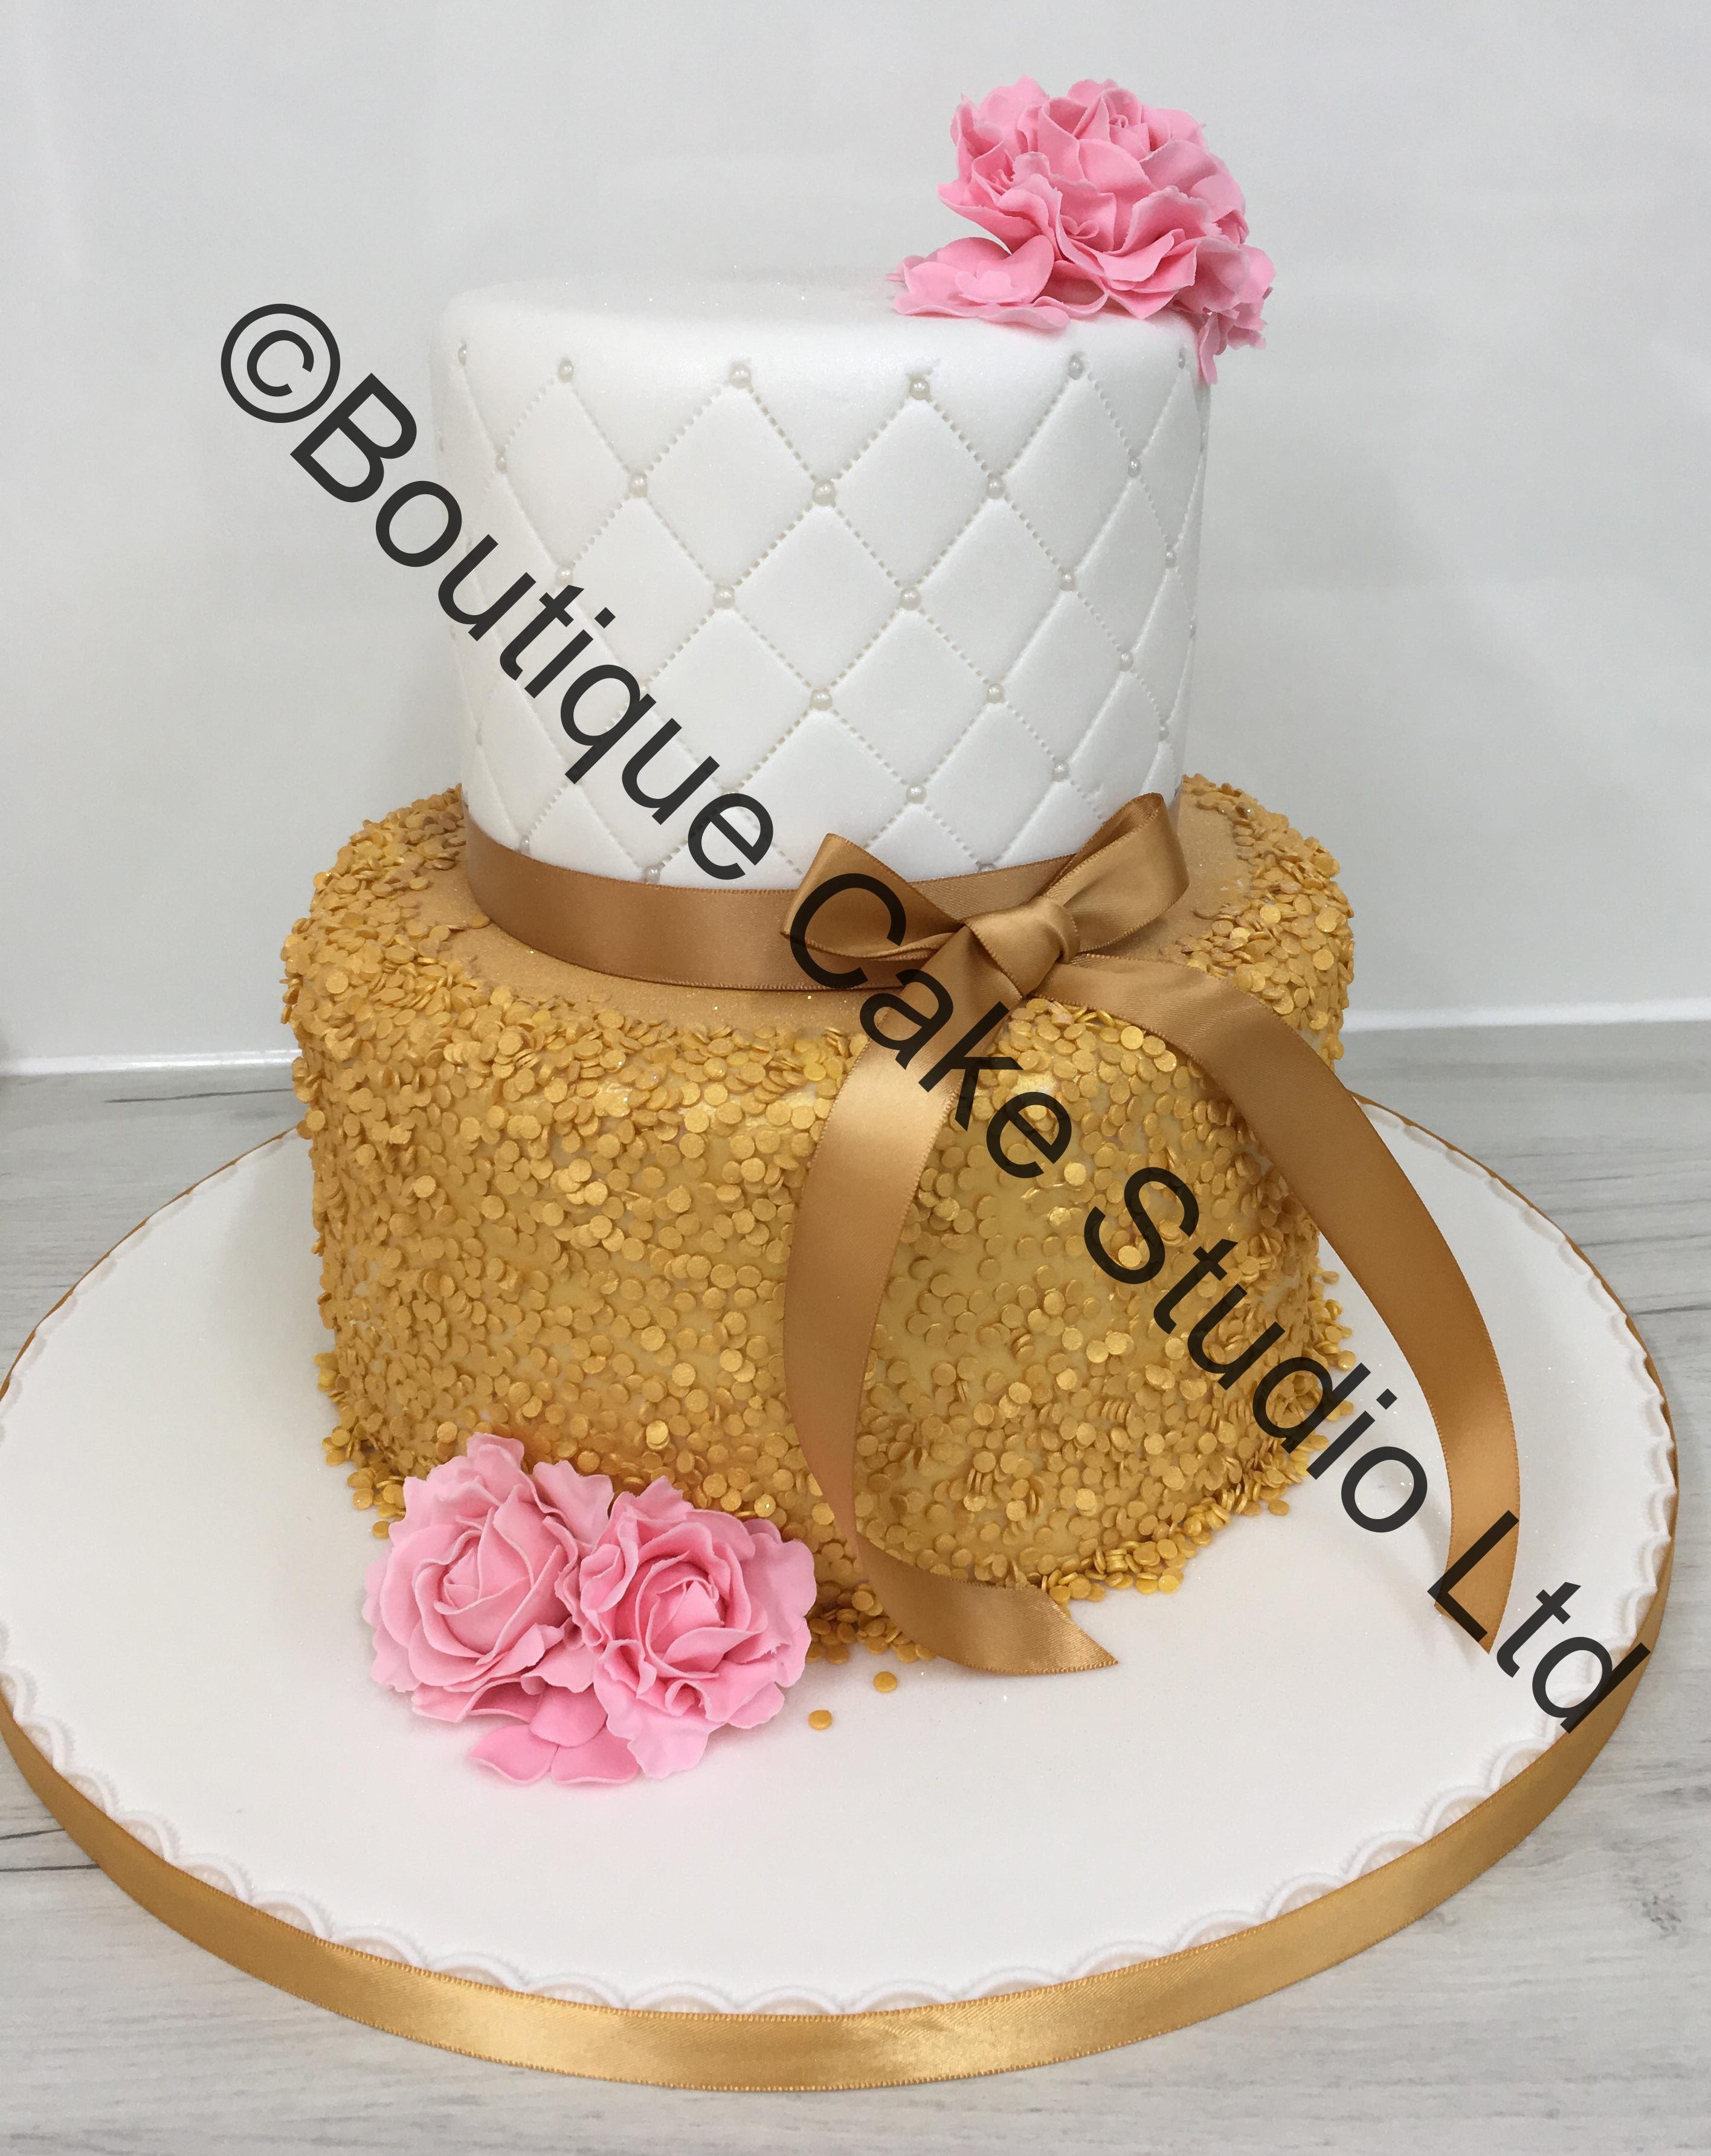 Gold and Cream Stacked Cake with Trellis and Sugar Flowers